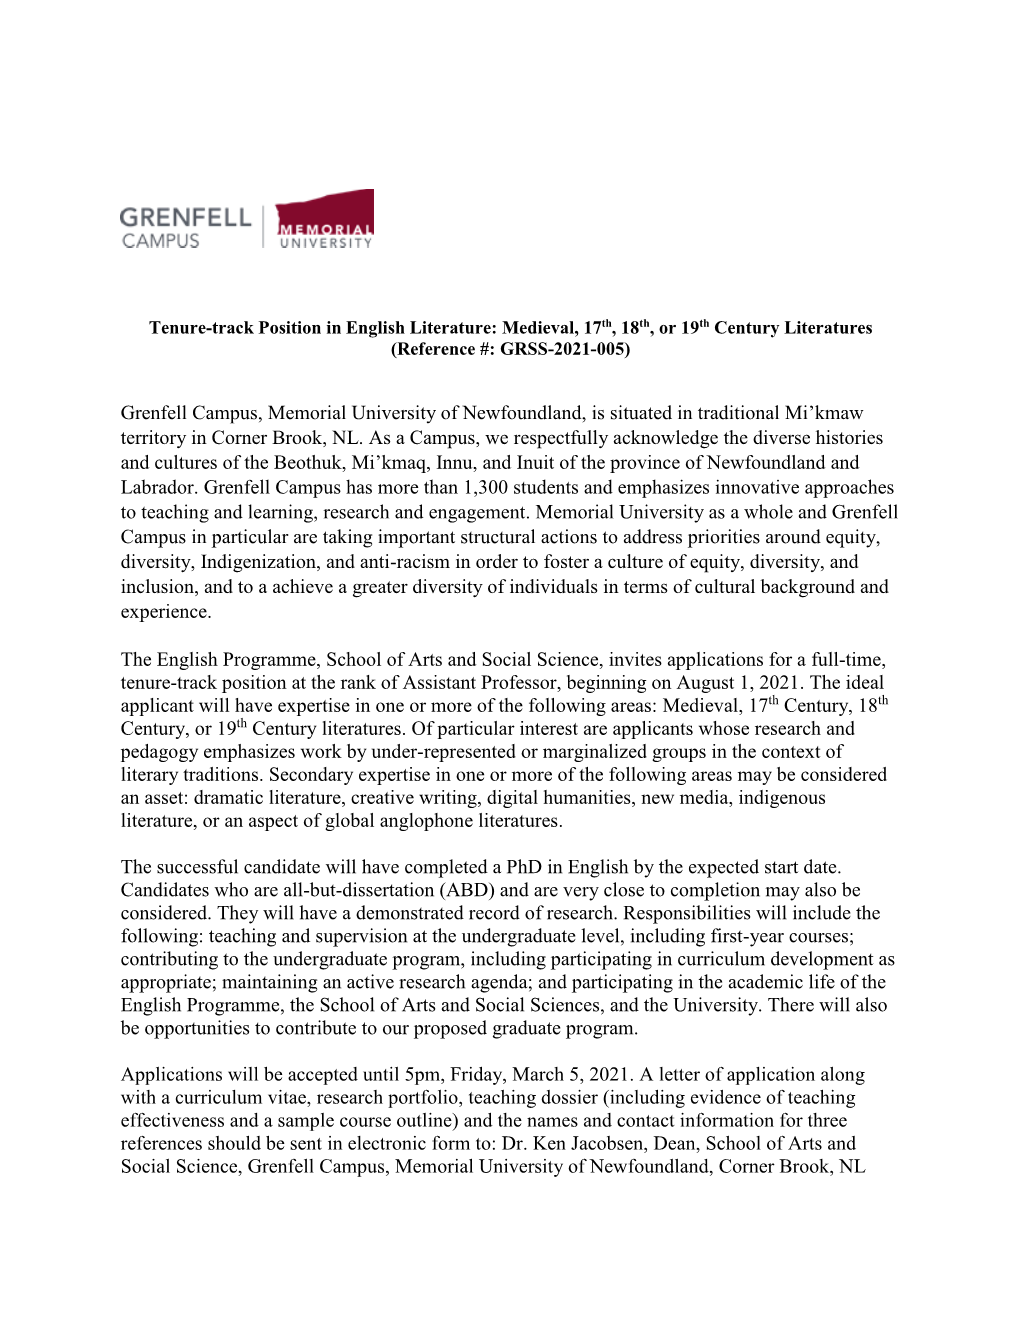 Tenure-Track Position in English Literature: Medieval, 17Th, 18Th, Or 19Th Century Literatures (Reference #: GRSS-2021-005)